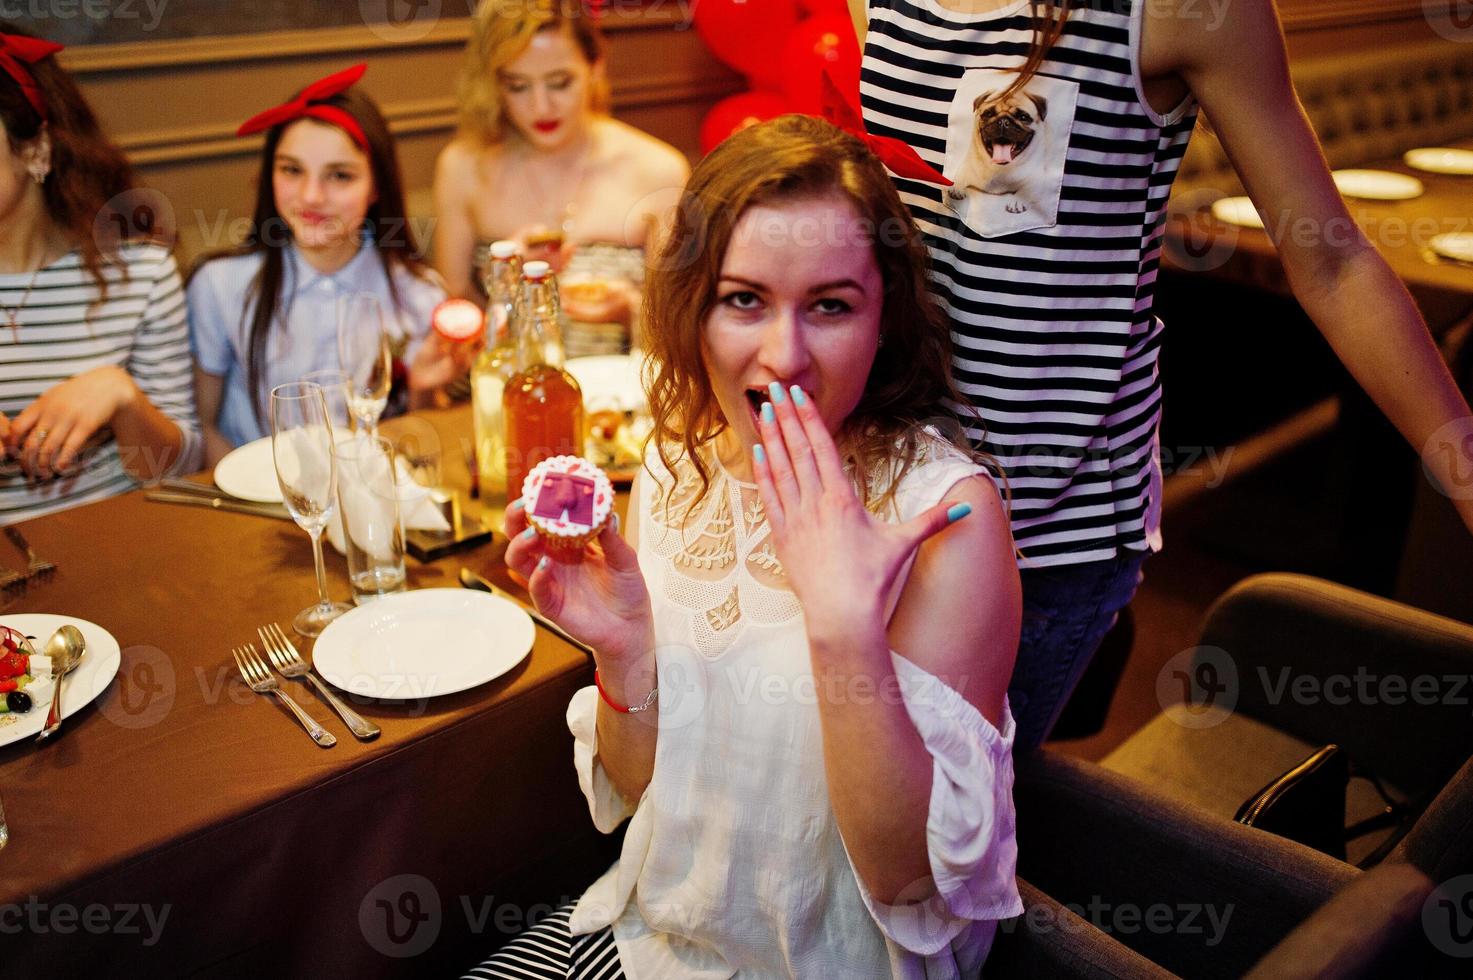 Fabulous girls posing with cupcakes in the restaurant at the bachelorette party. photo